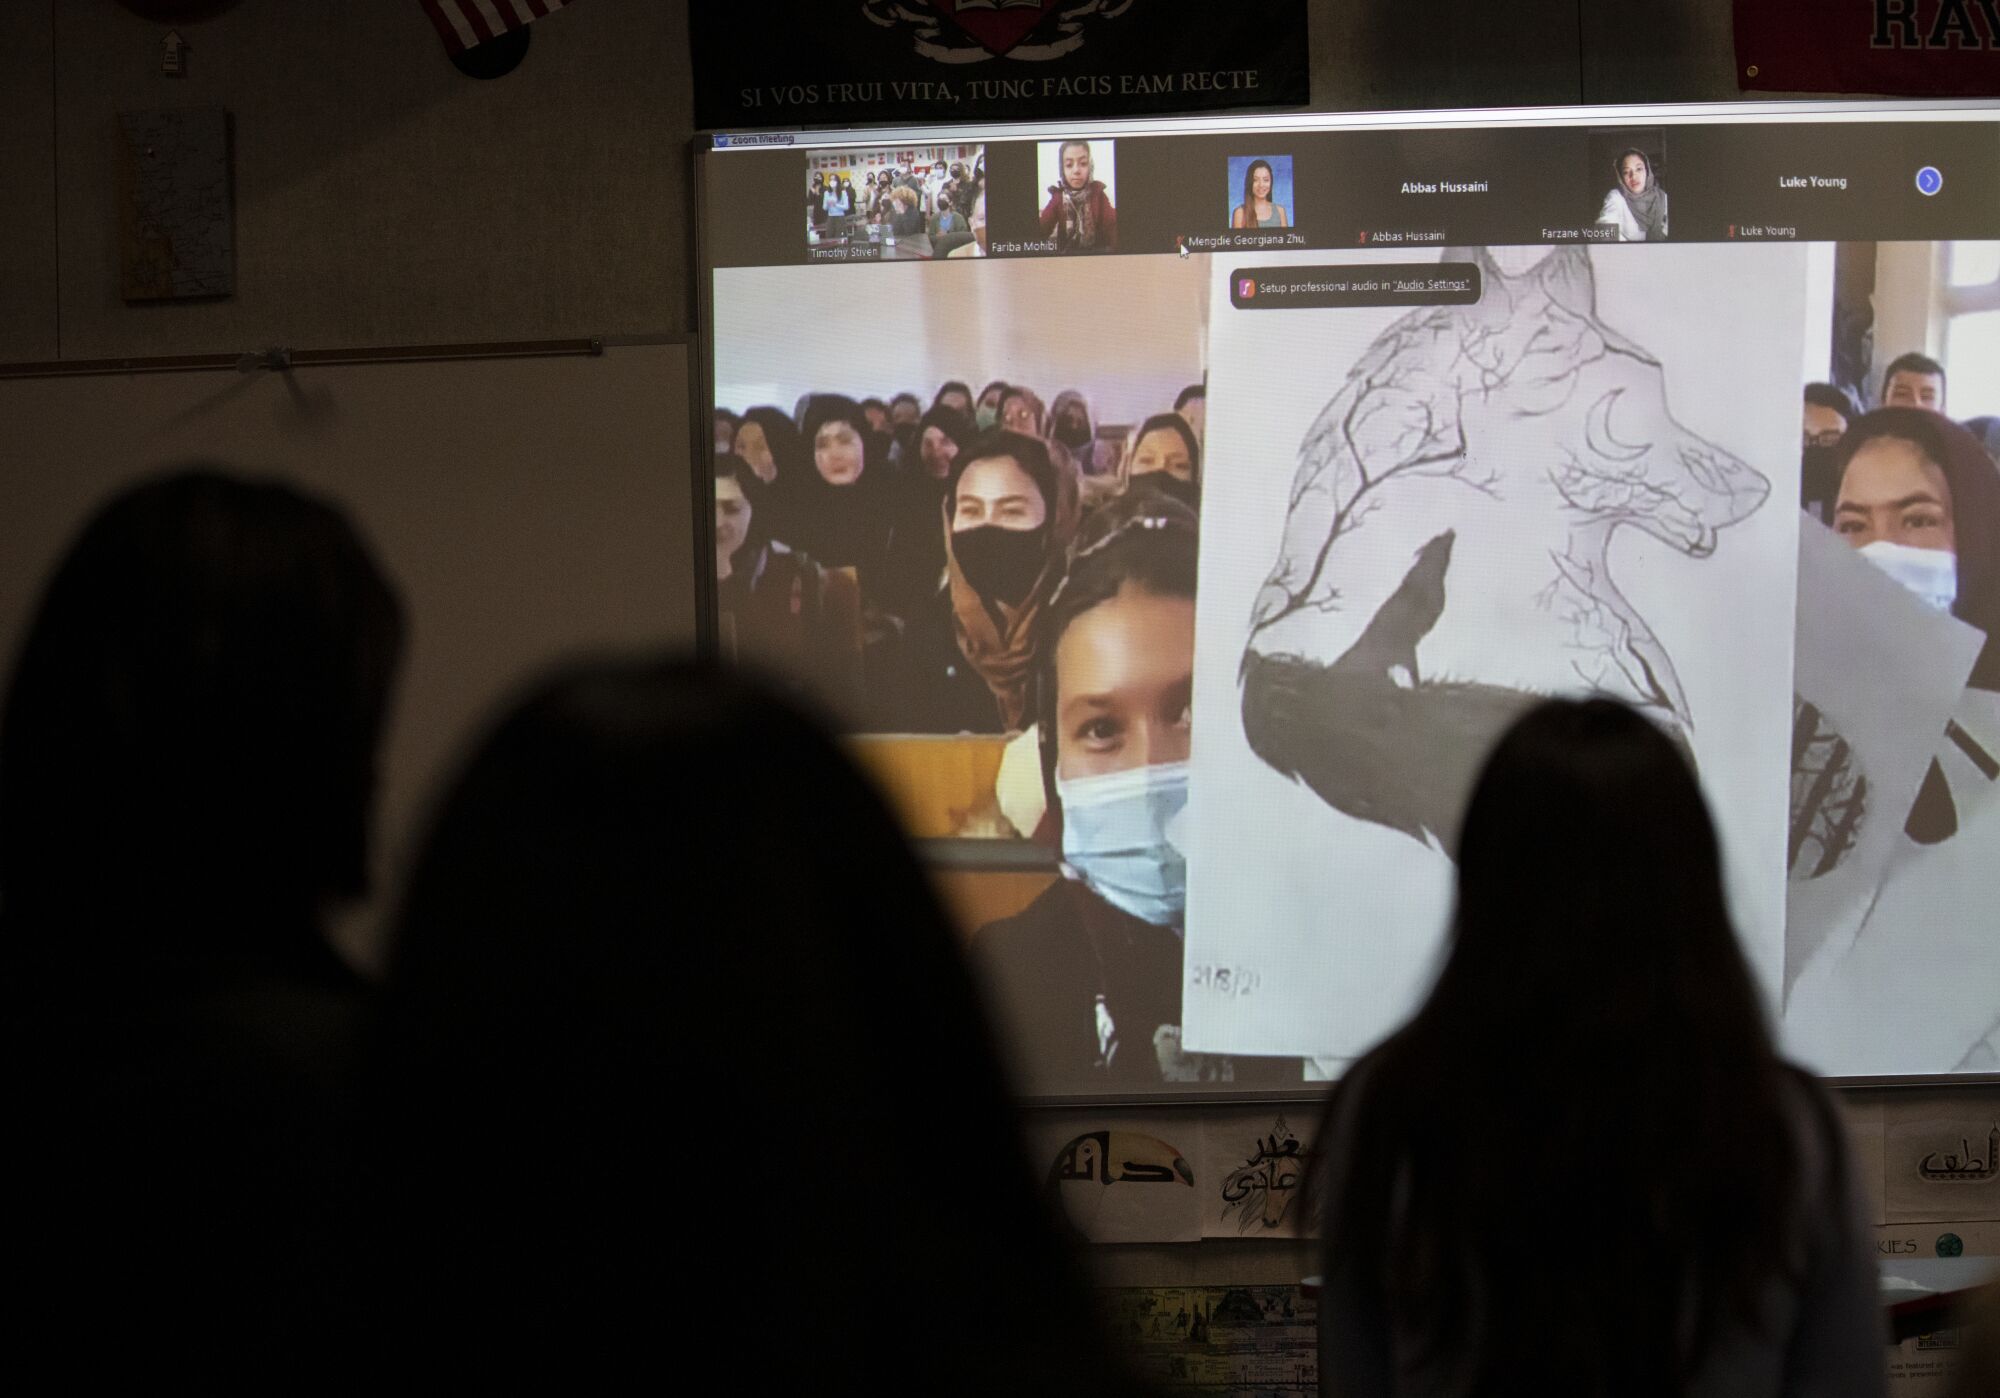 A student in the Mawoud center in Kabul, Afghanistan shows her artwork to Canyon Crest Academy students via Zoom.